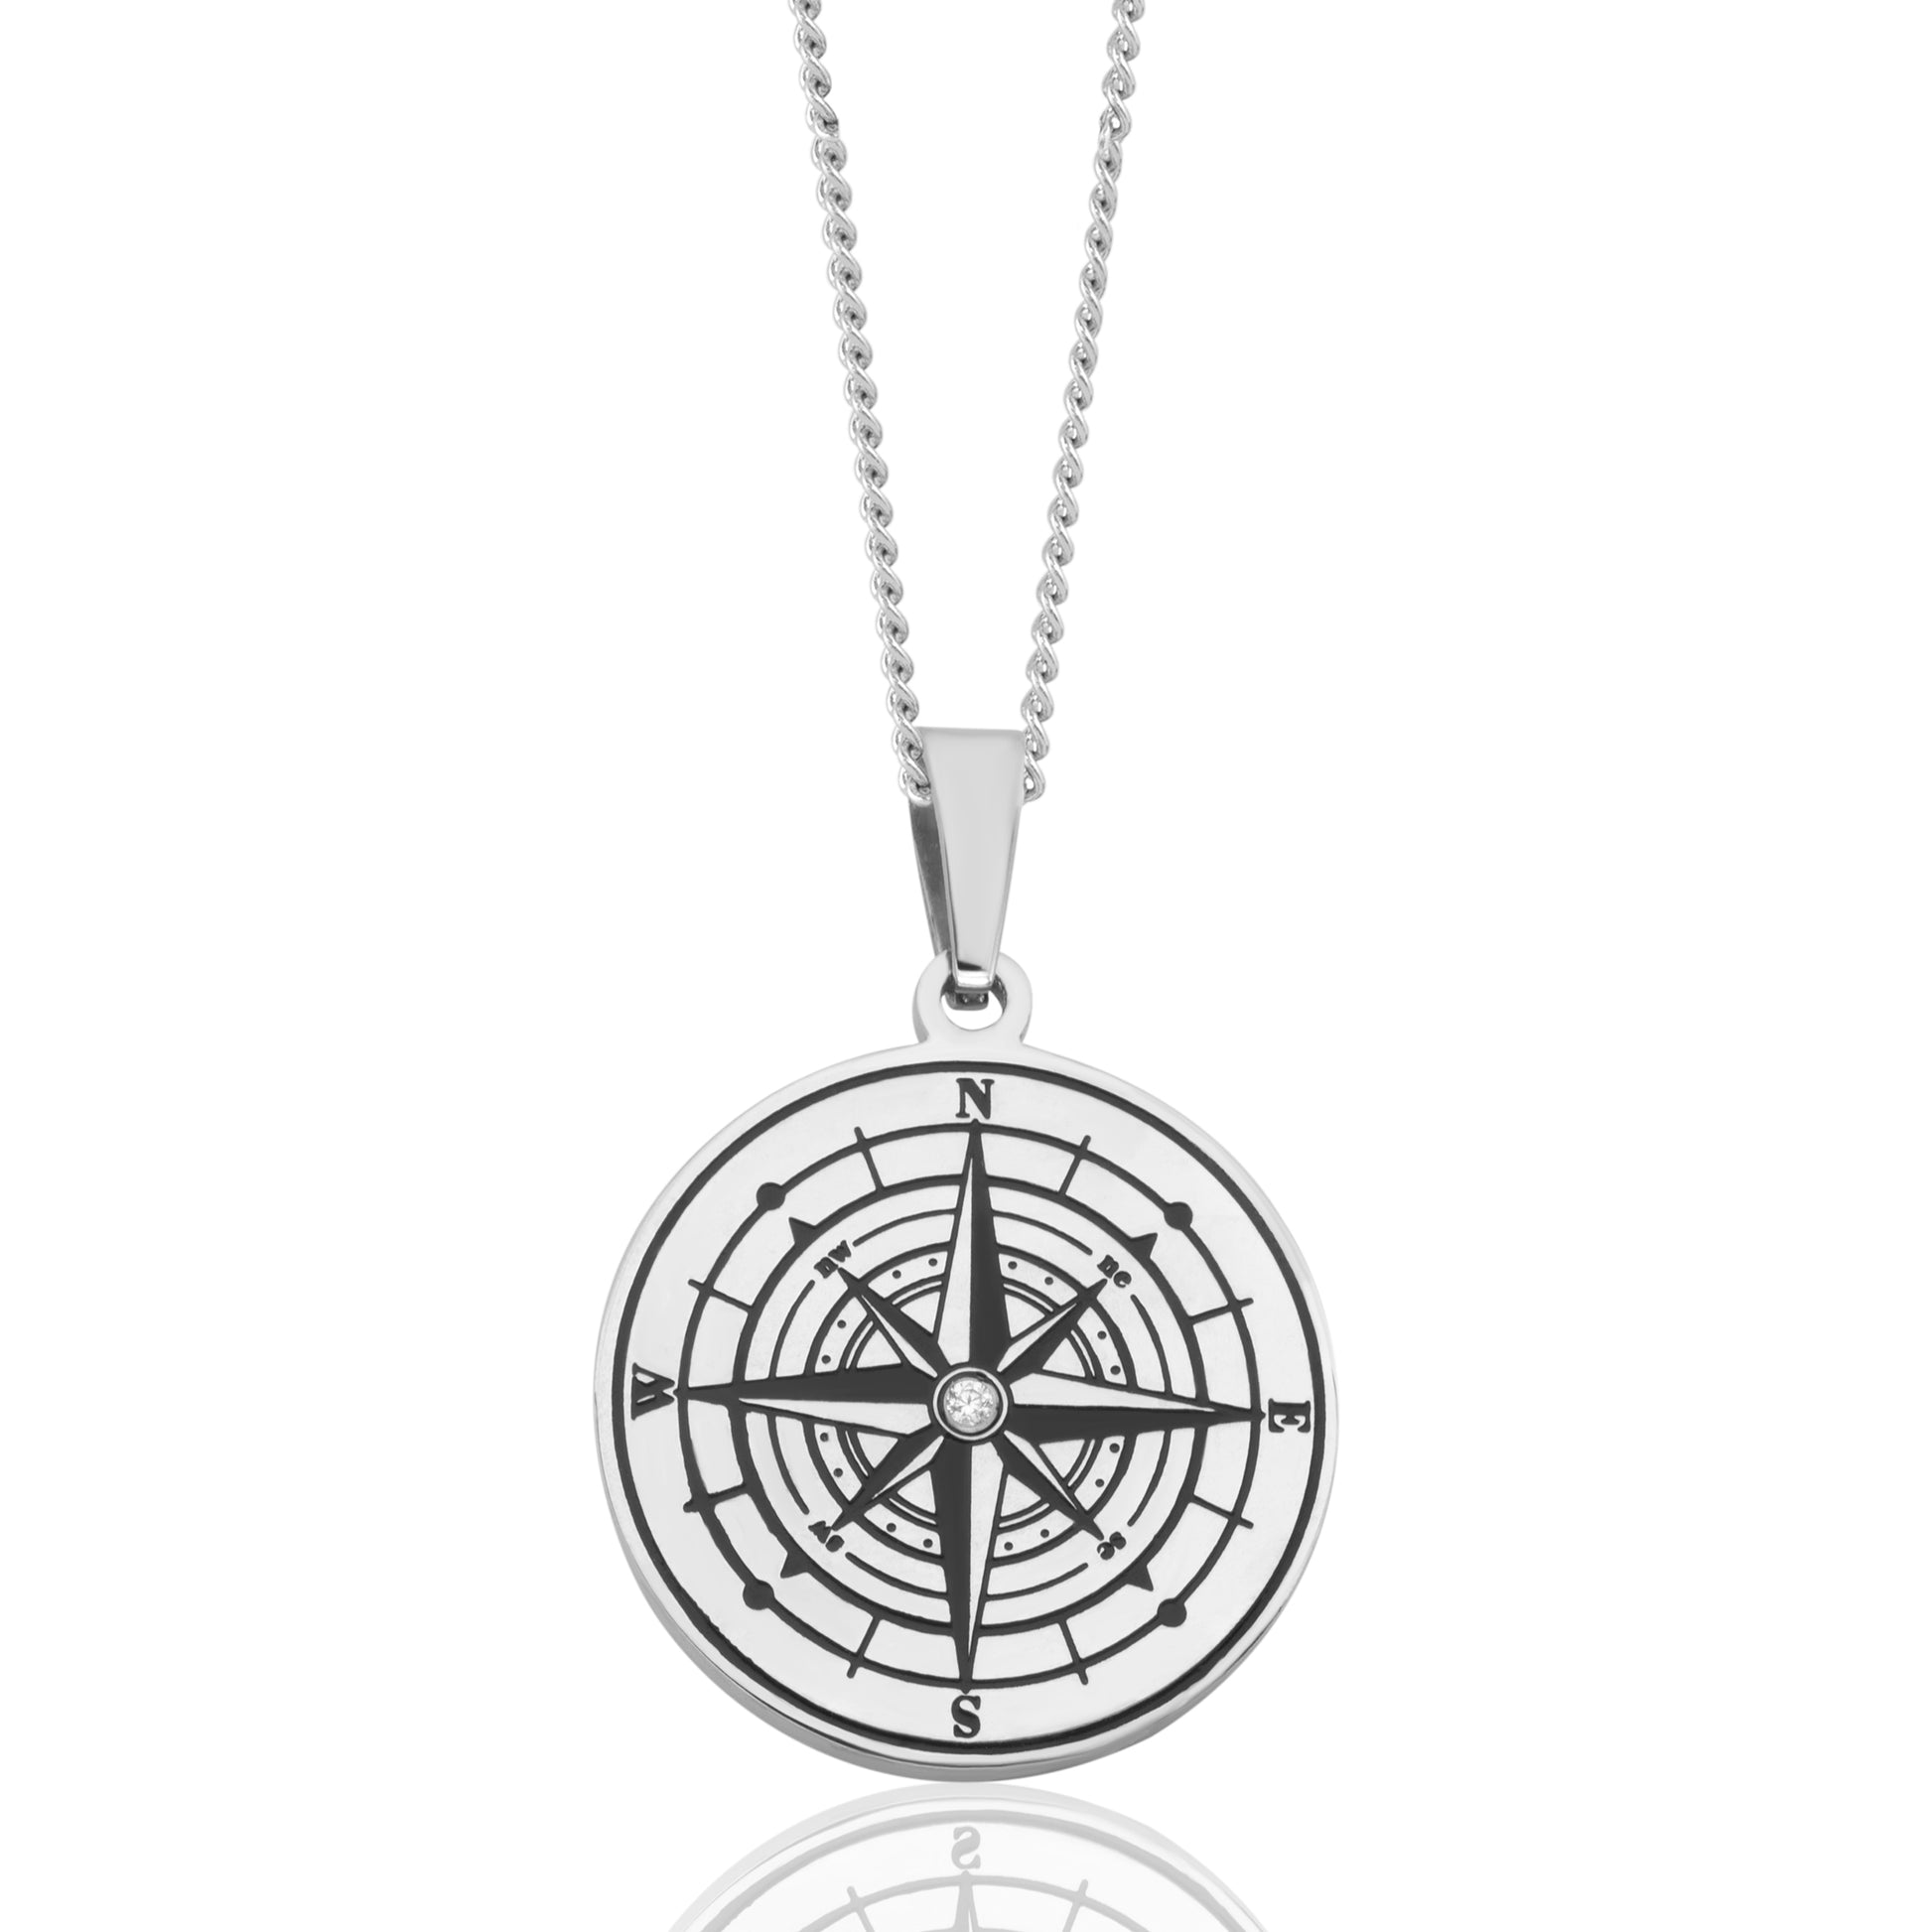 Nautical Compass CZ Pendant Necklace. The Compass Pendant features an engraving of a compass on the front of the pendant that is set in a center clear Cubic Zirconia stone. Since ancient times the compass has pointed travelers in the right direction. Known as a symbol of guidance and protection, it has always helped explorers find their way home. This pendant comes with an 18 inches chain with a 3 inches extender and a Lobster Claw clasp. The pendant material is Stainless Steel with a 1.25 inches length.